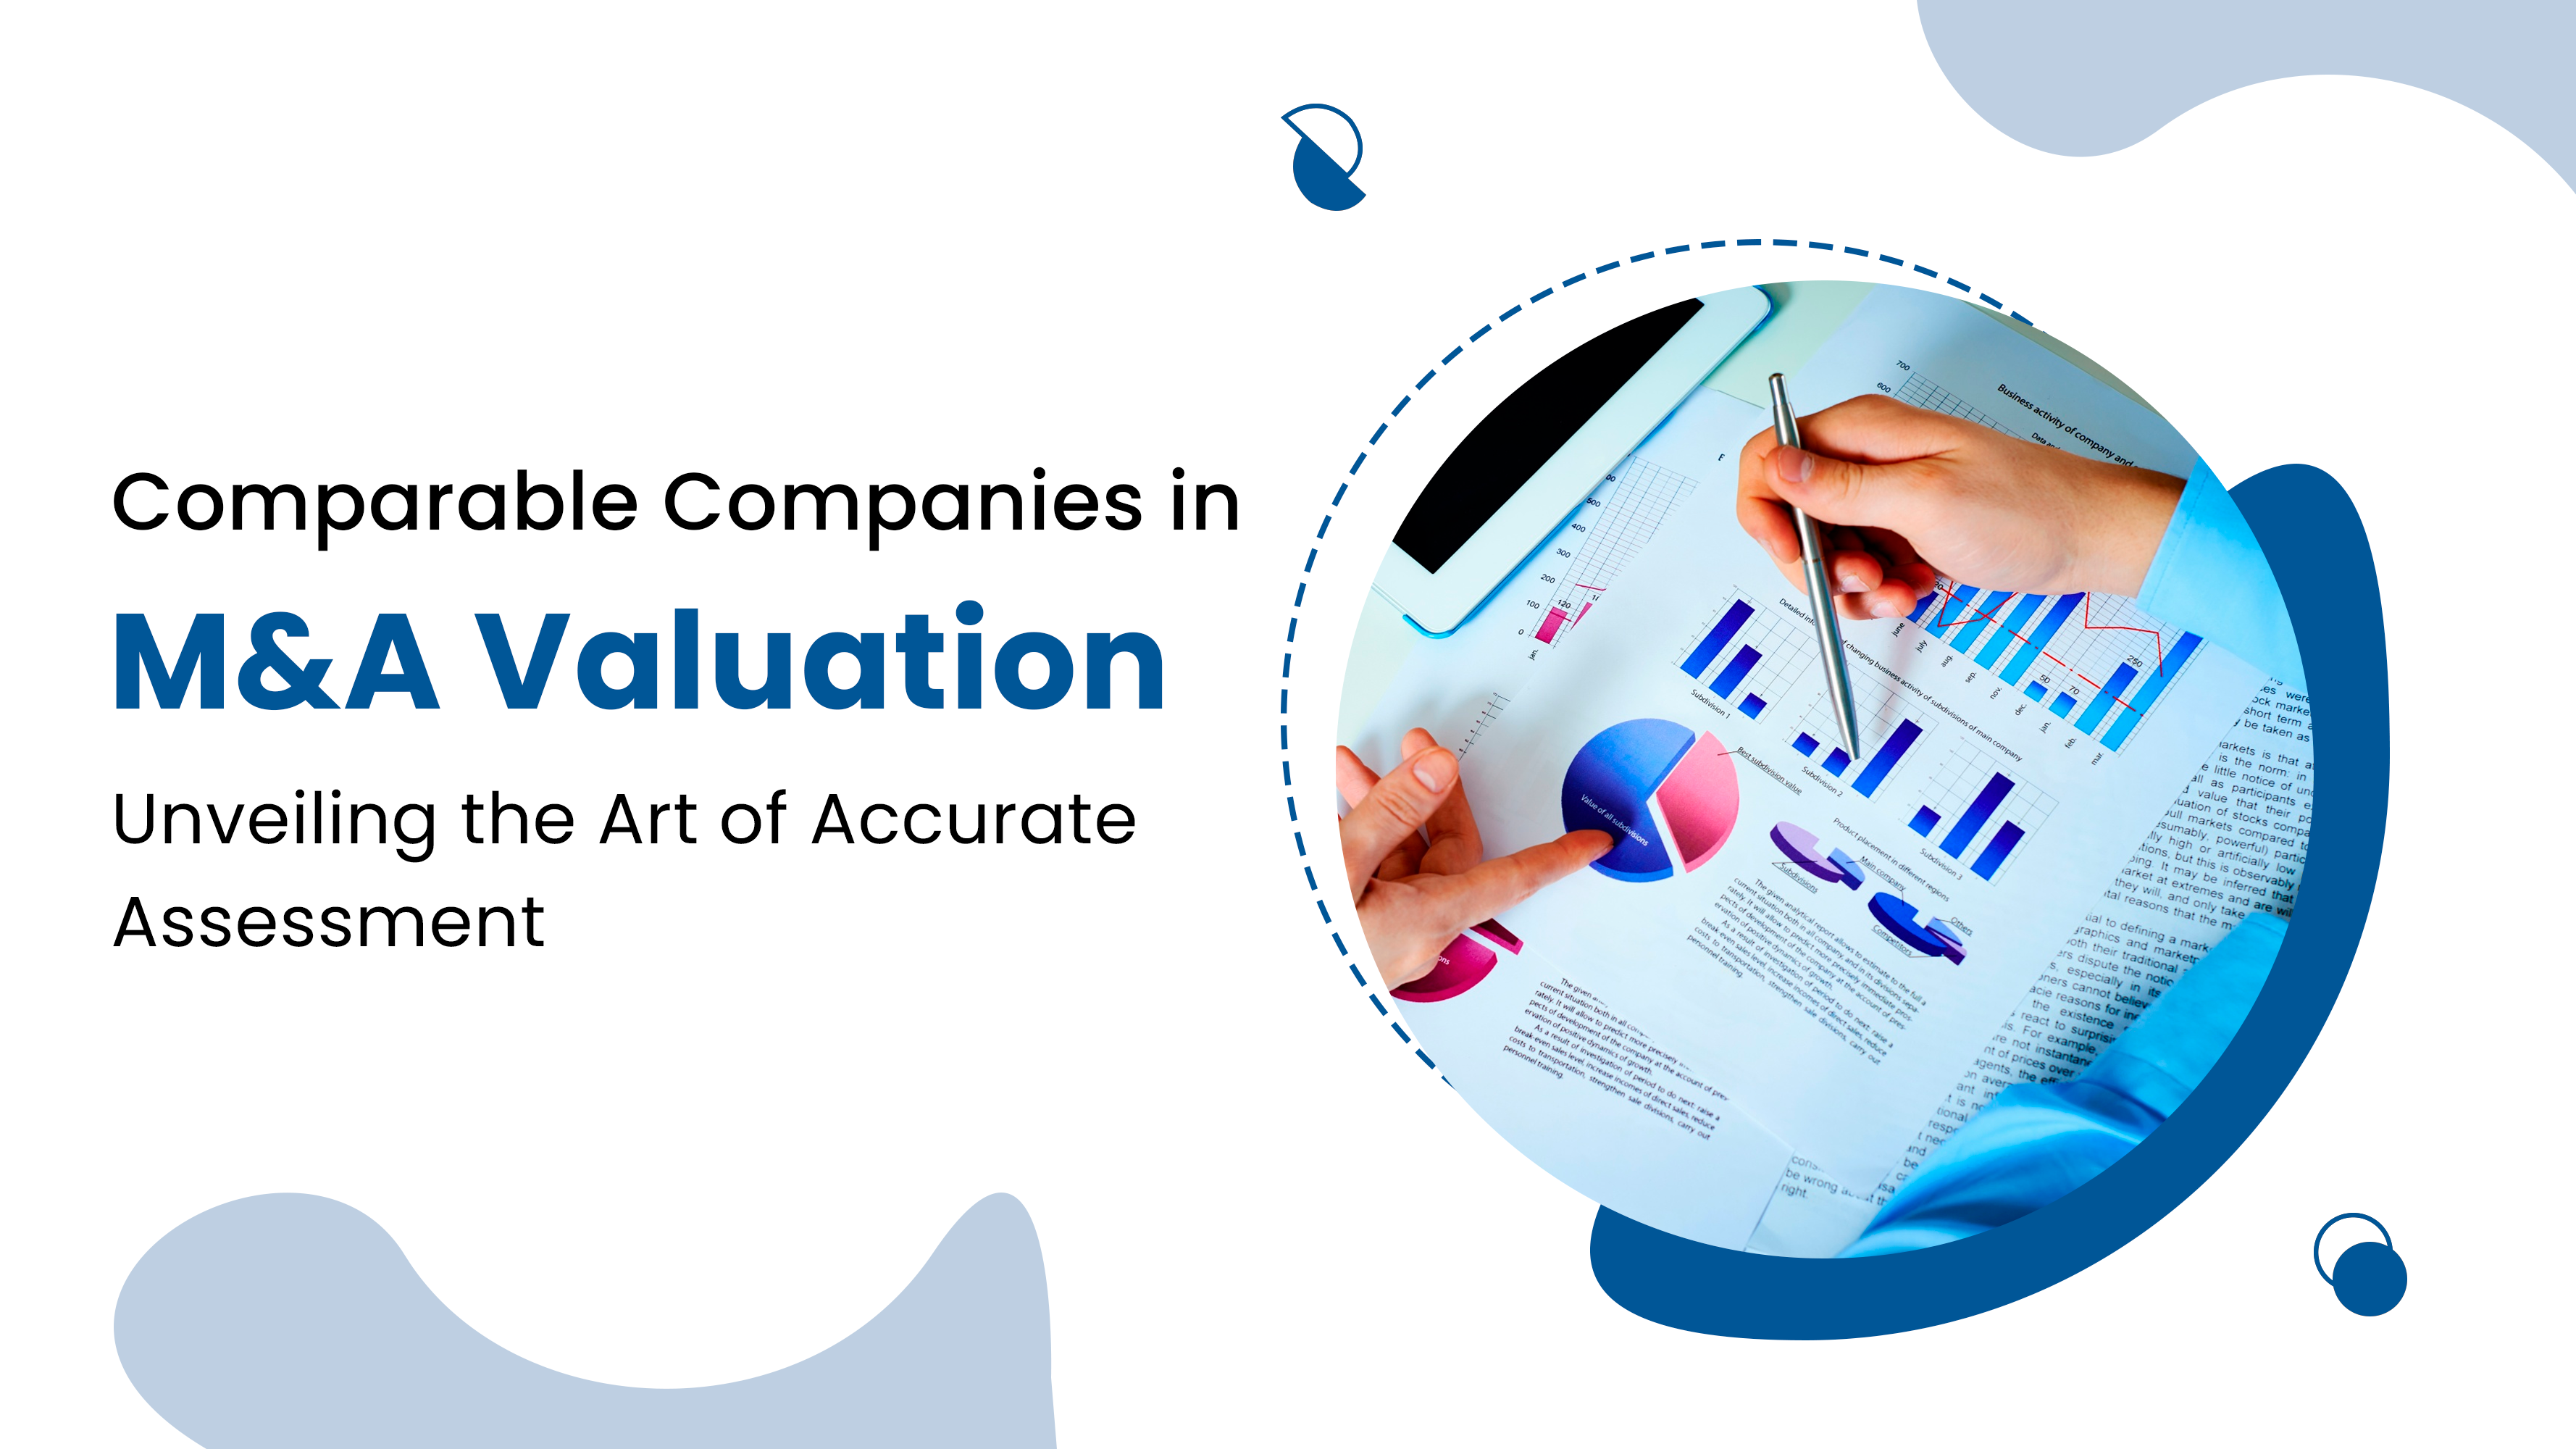 Comparable Companies in M&A Valuation: Unveiling the Art of Accurate Assessment